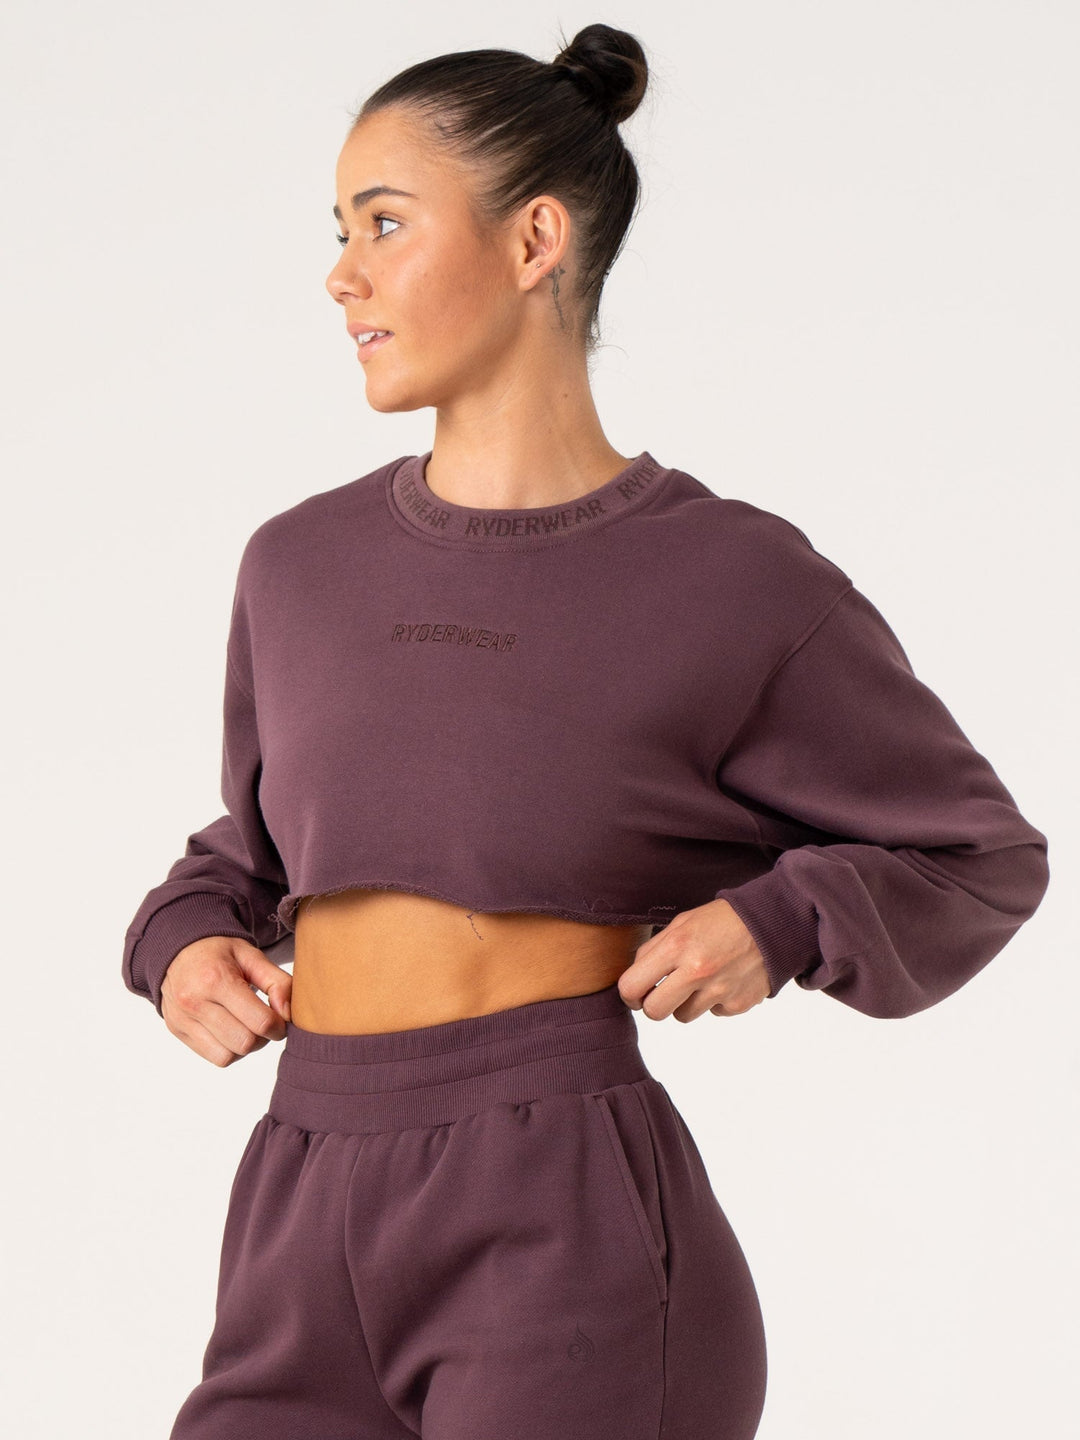 Cropped Sweater - Plum Clothing Ryderwear 